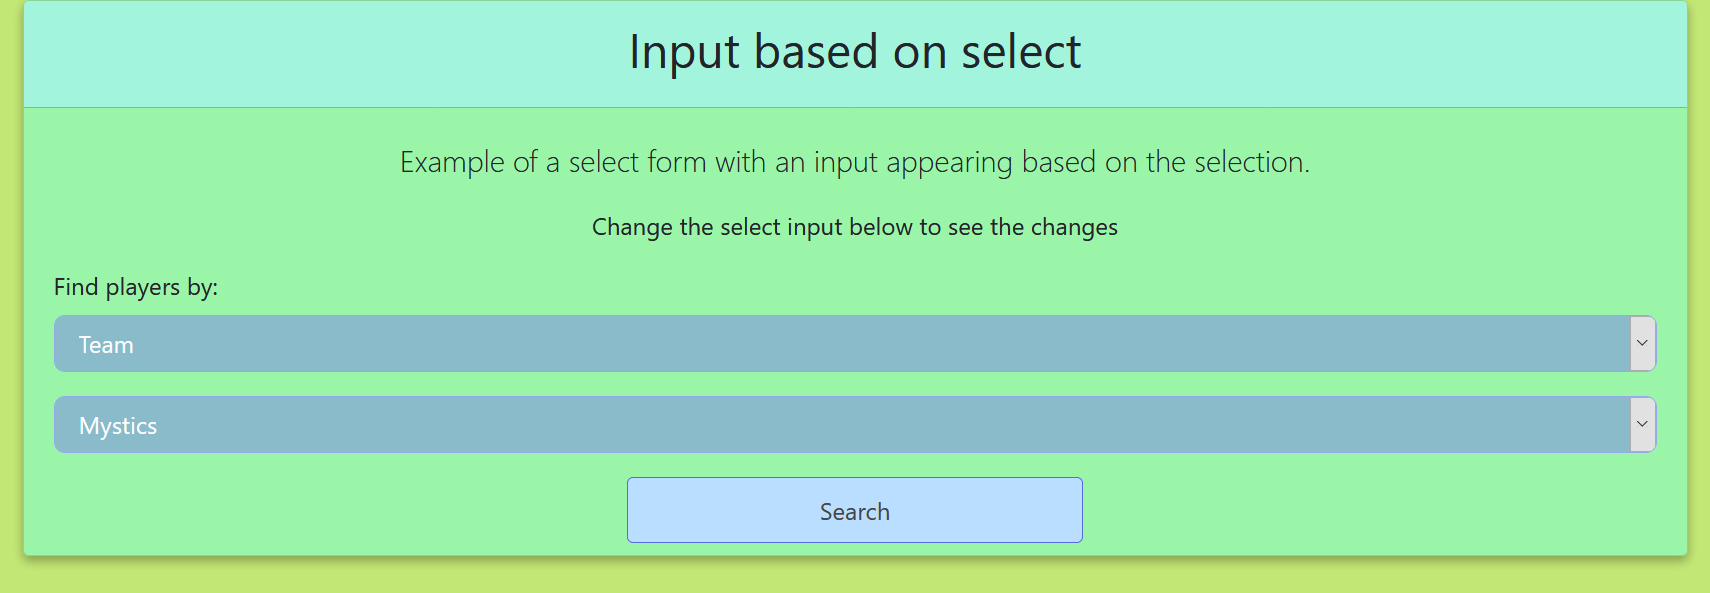 HTML form inputs based on a select element